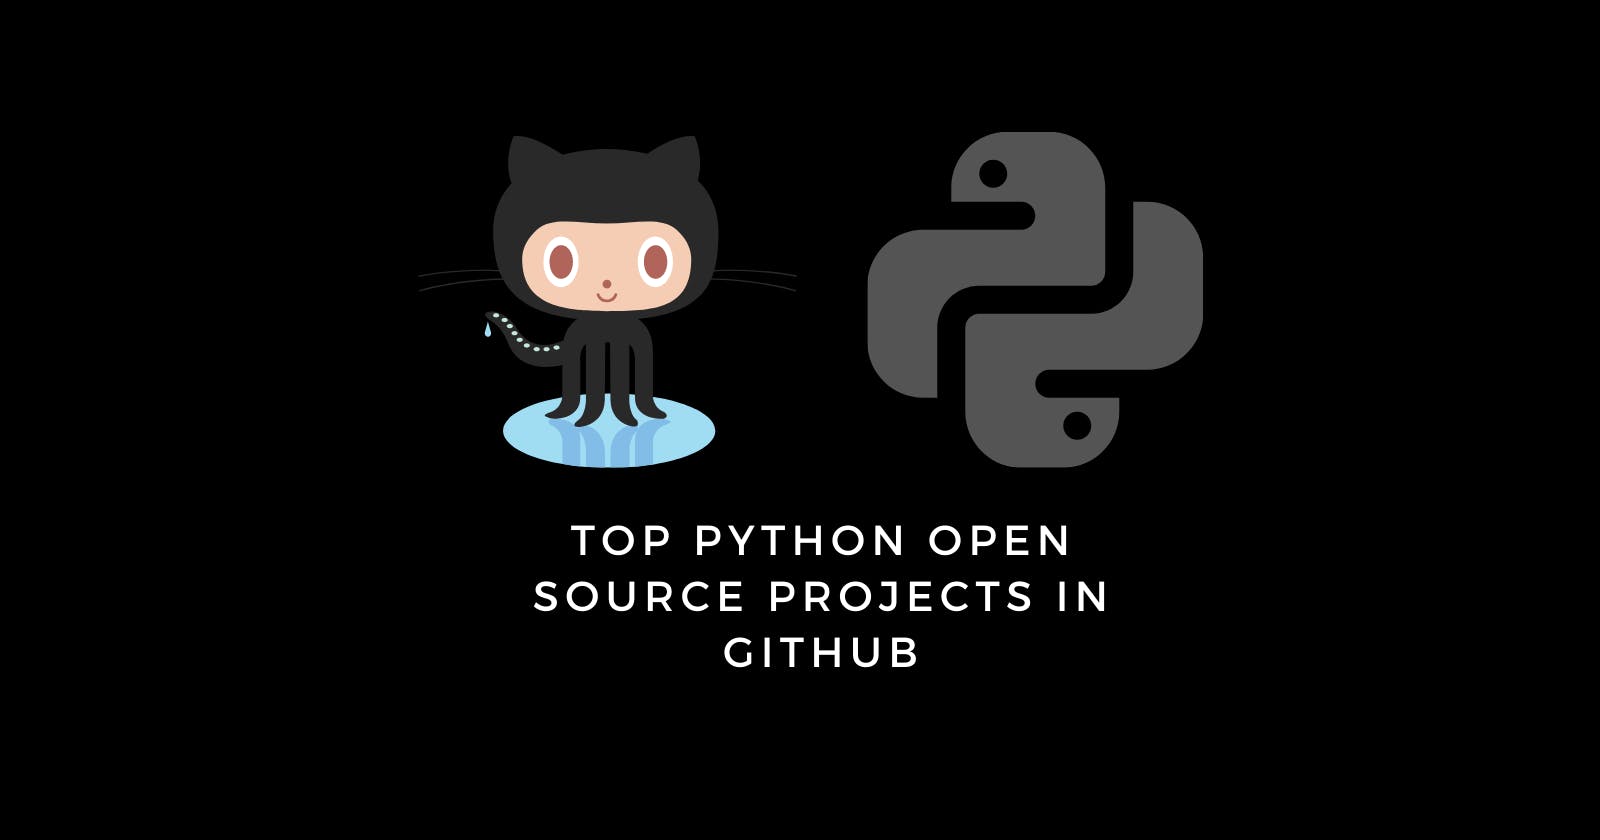 Python Open Source projects in Github